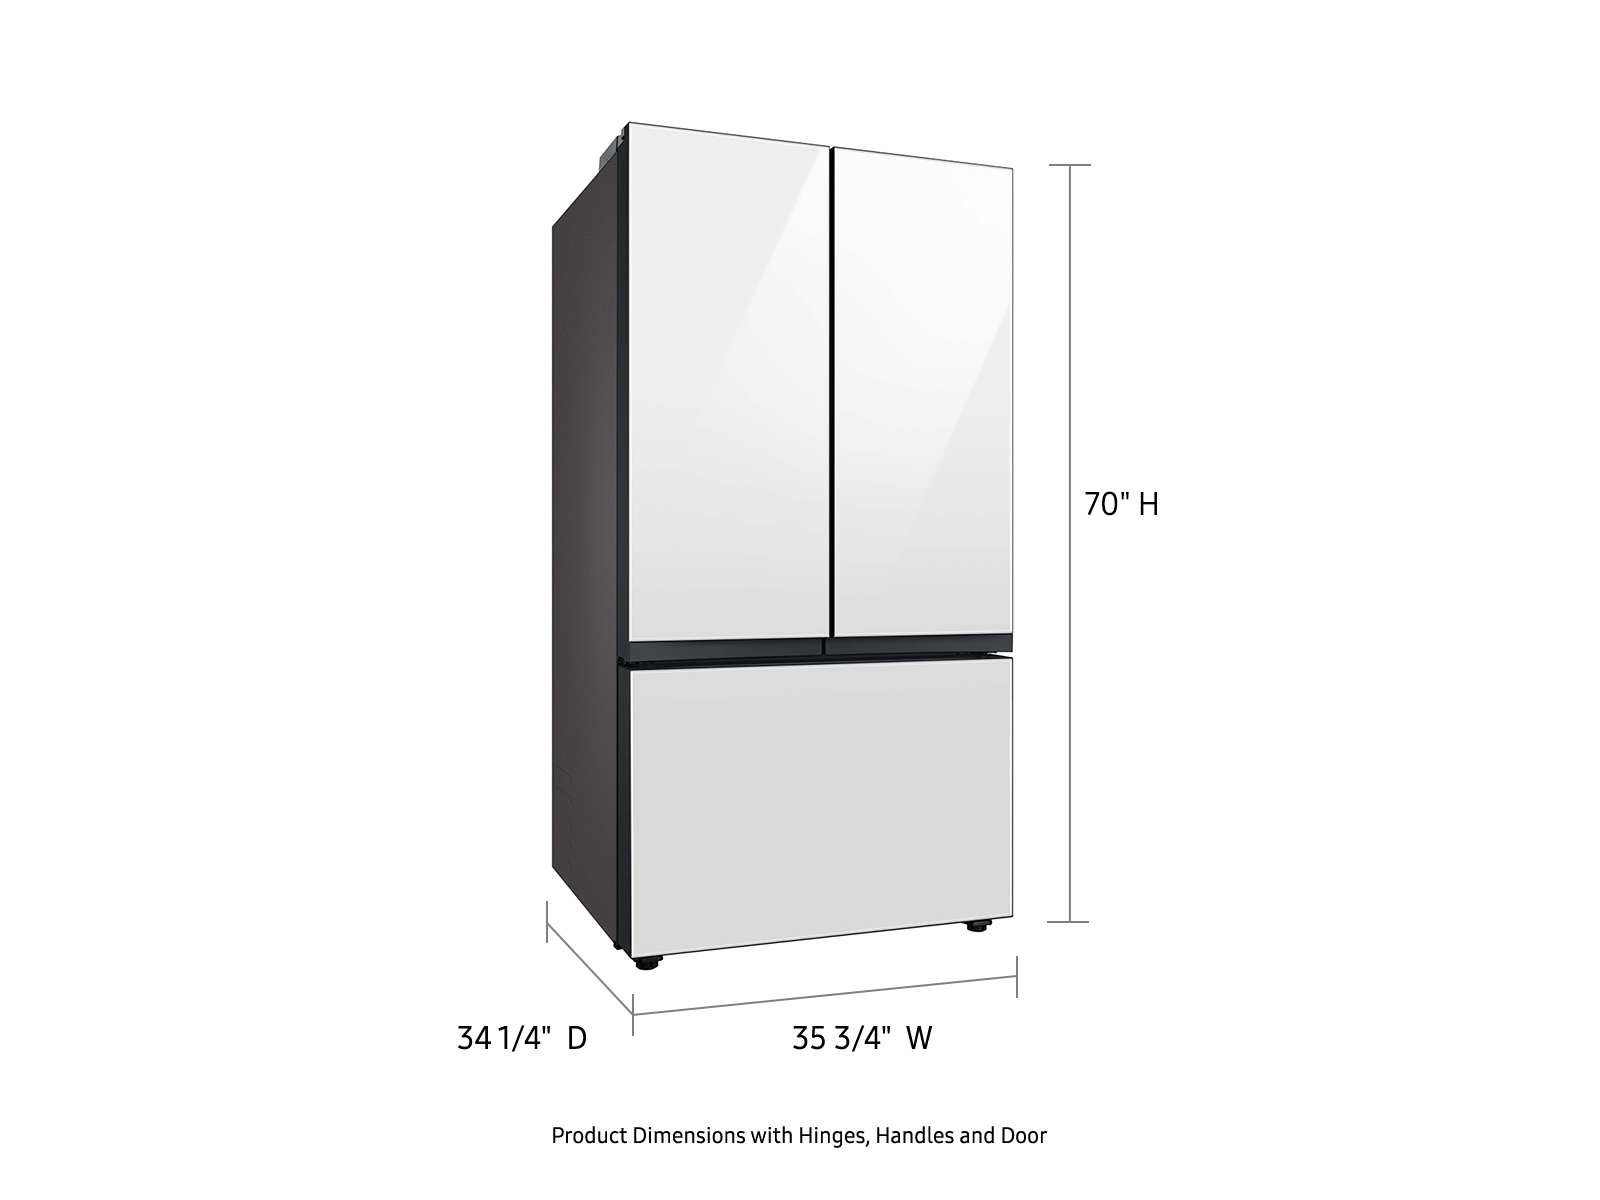 Thumbnail image of Bespoke 3-Door French Door Refrigerator (30 cu. ft.) with AutoFill Water Pitcher in White Glass